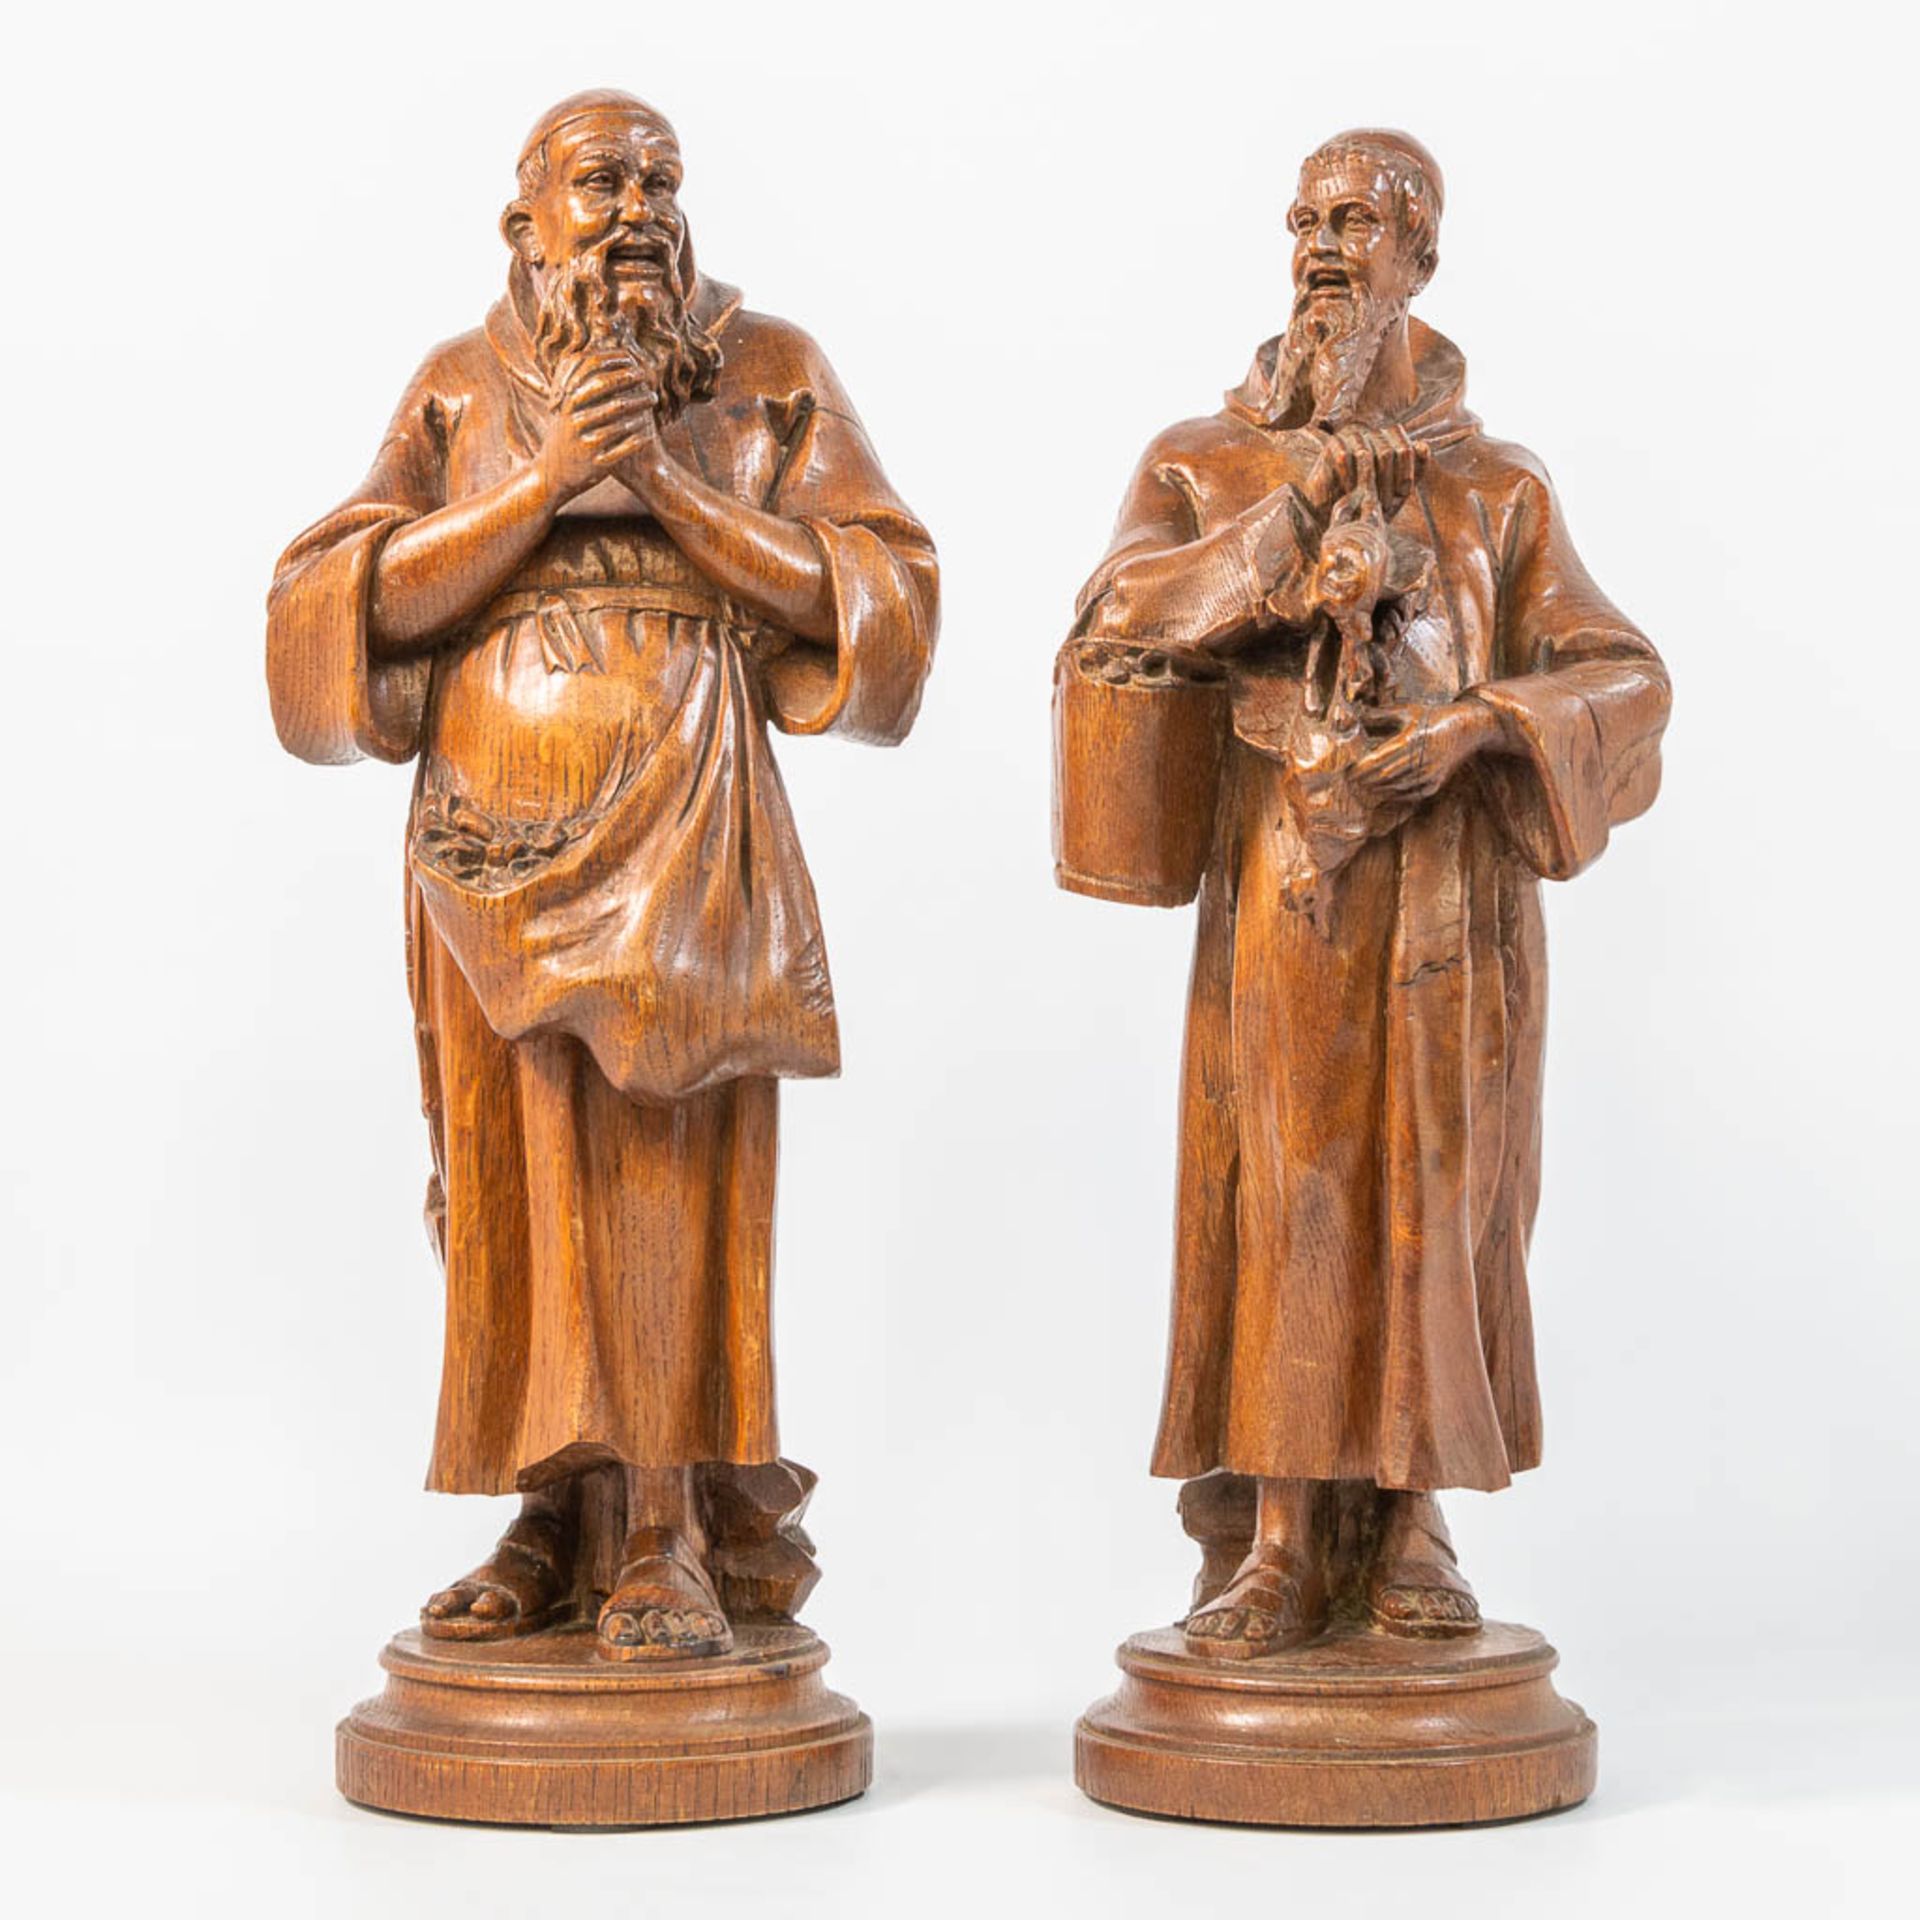 A pair of wood sculptures, 19th century.